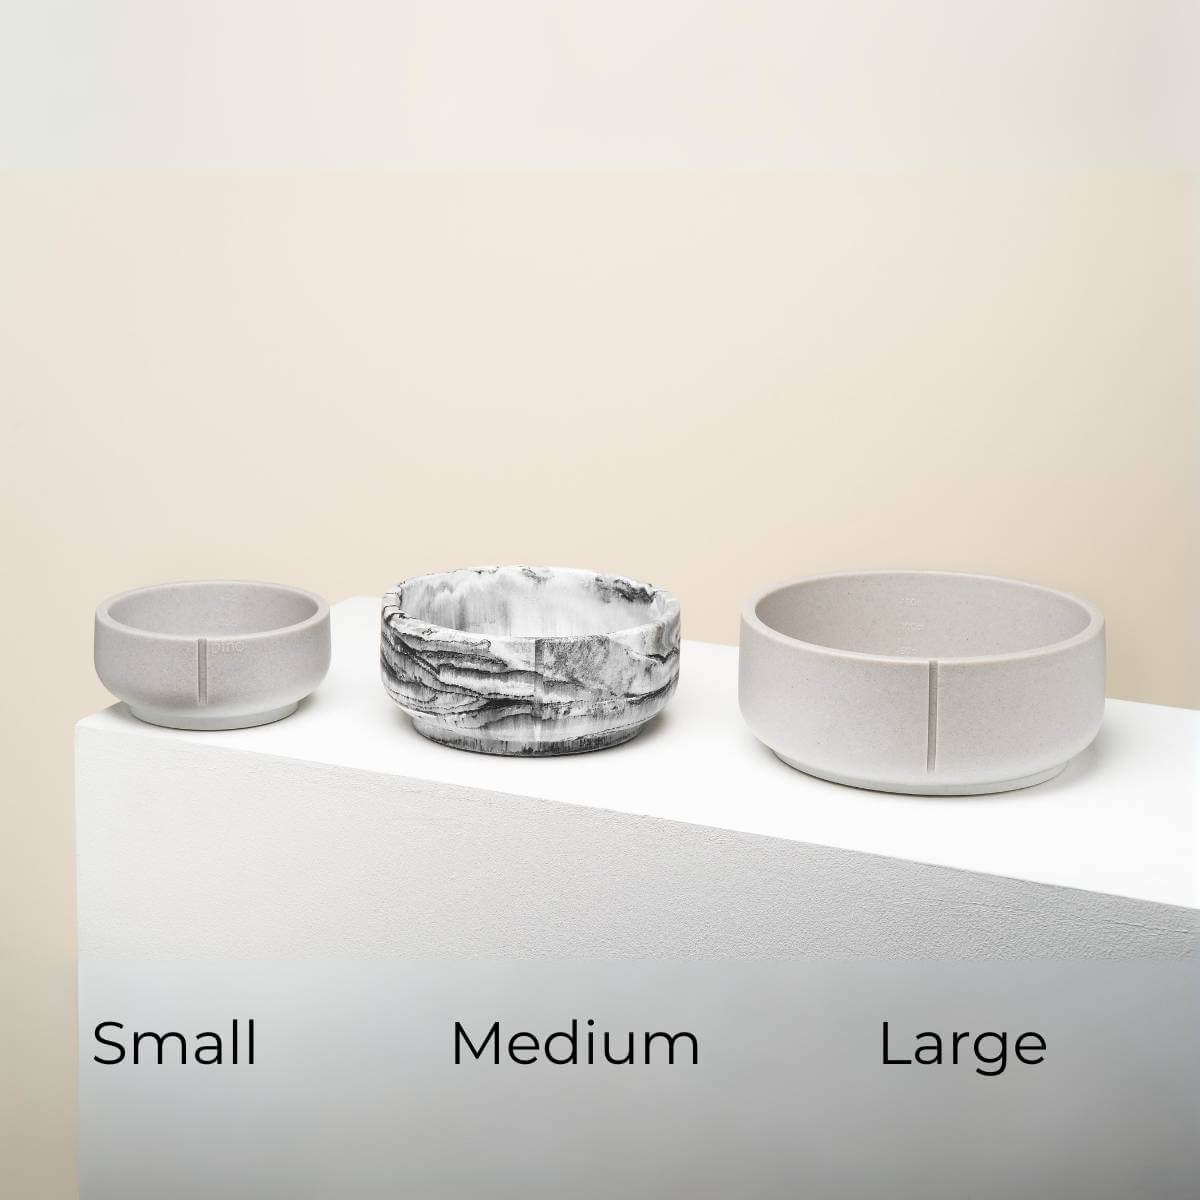 The diffrent sizes of the bowls in Dolphin Grey color